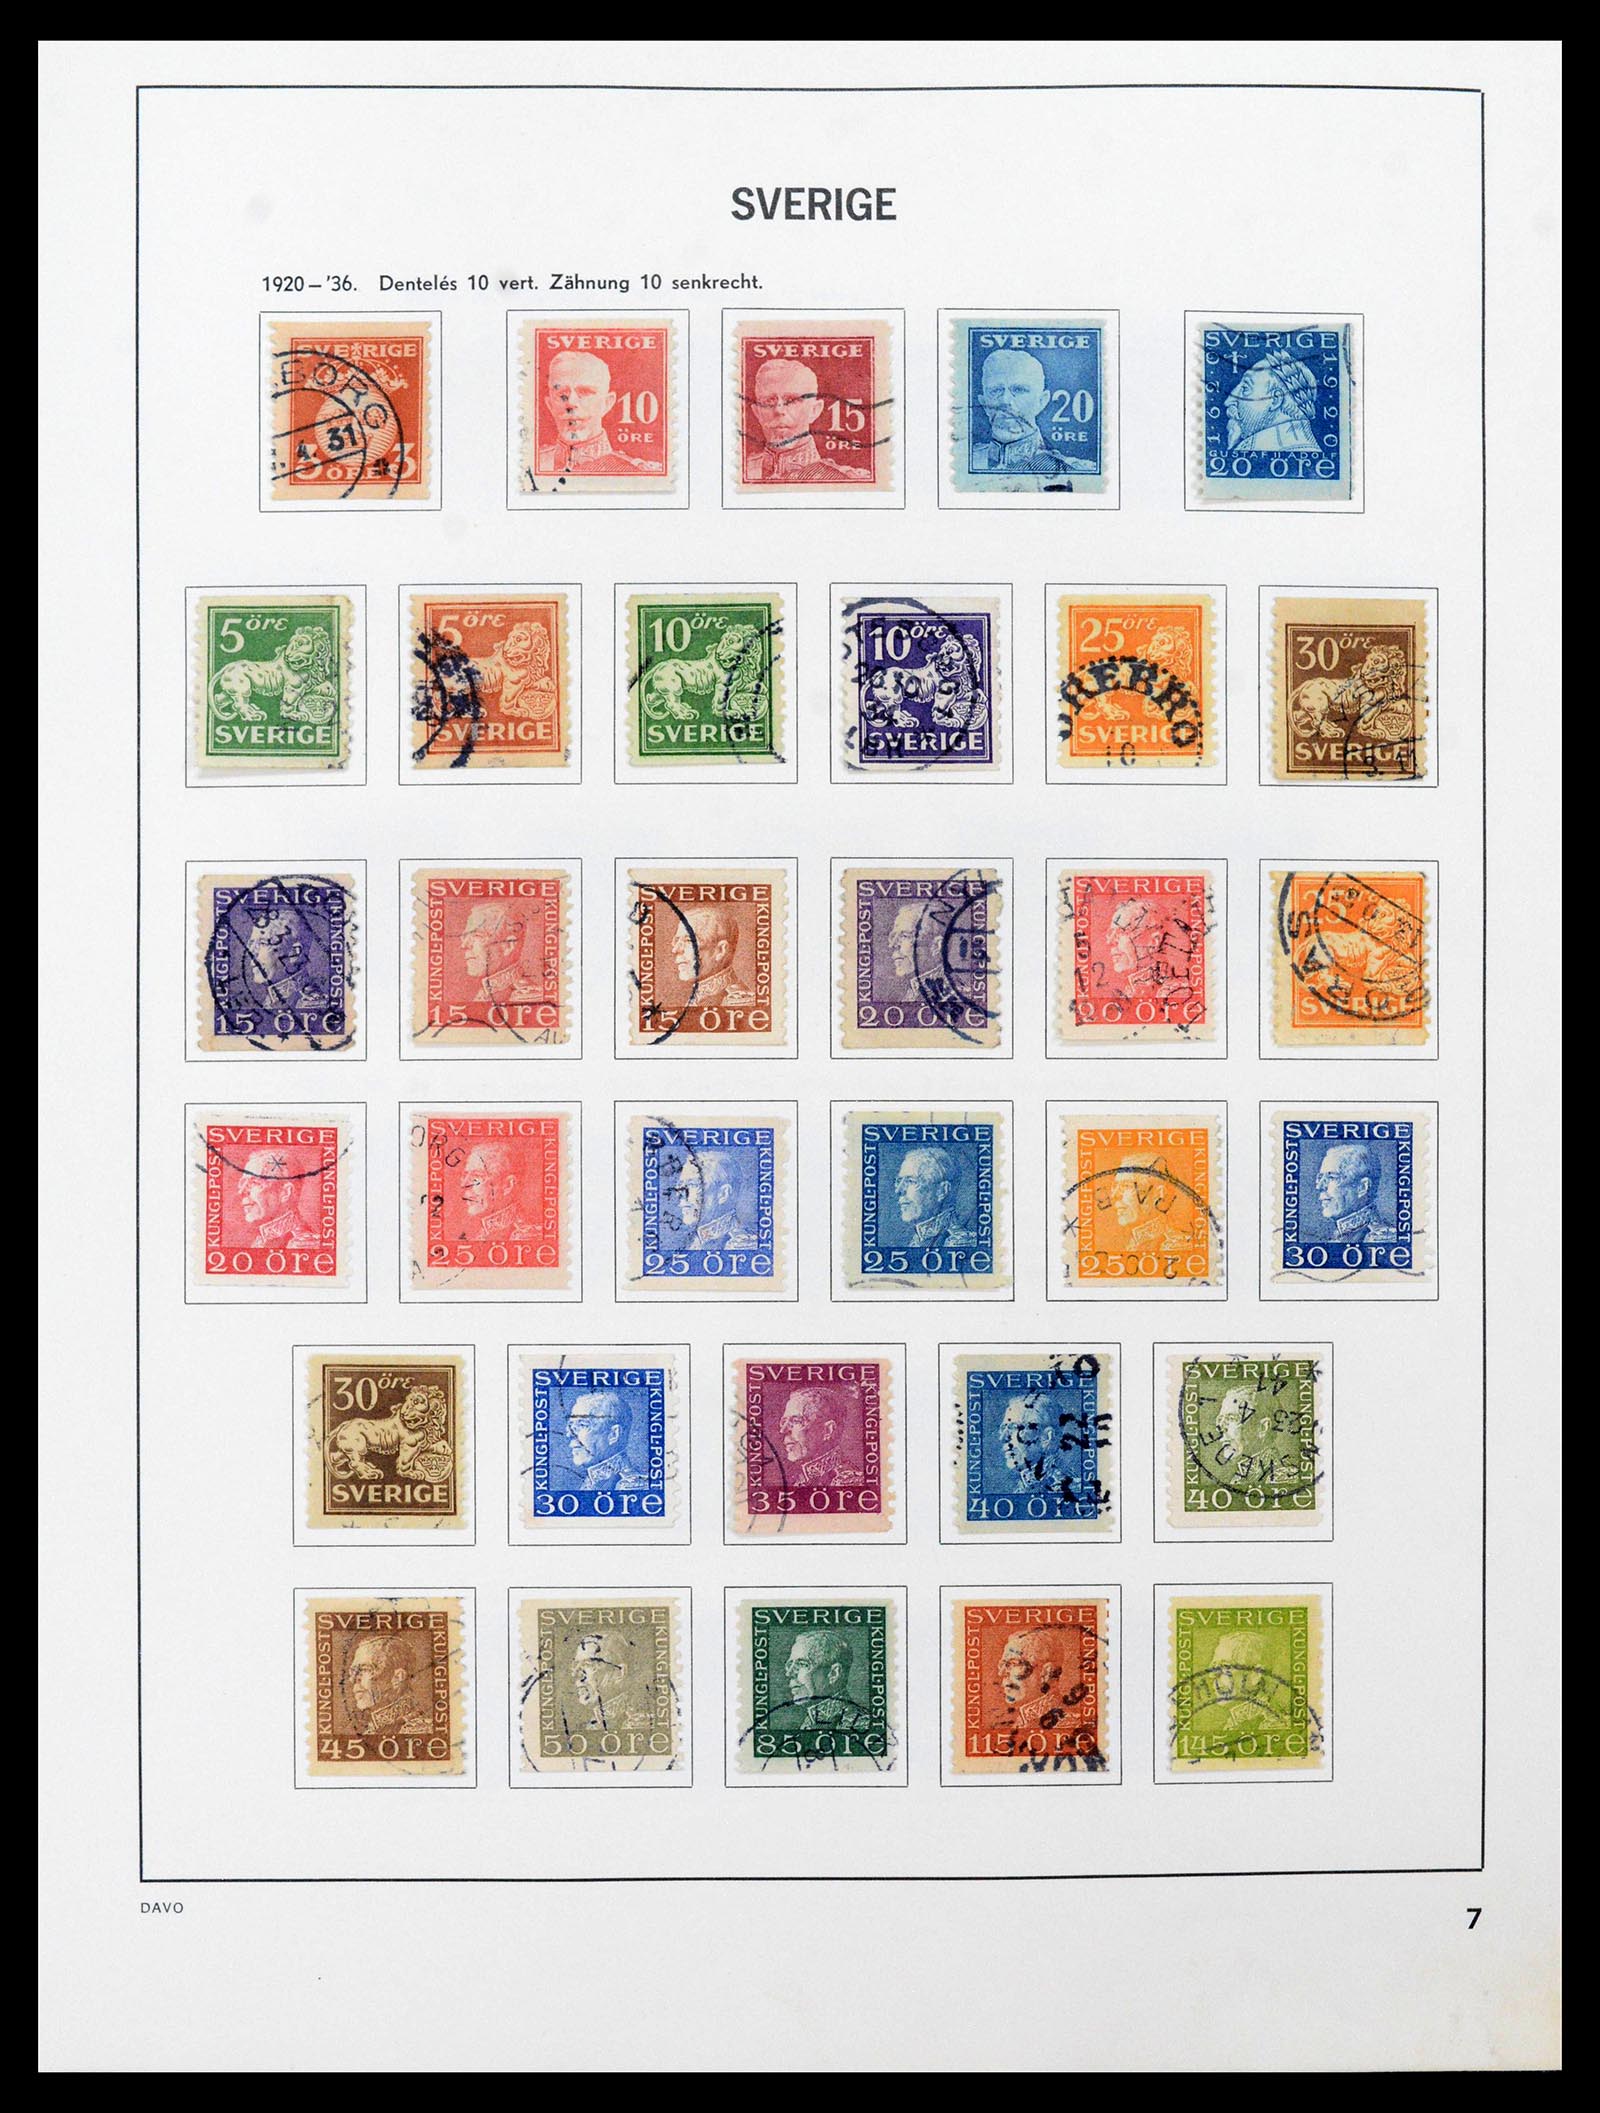 39331 0007 - Stamp collection 39331 Sweden 1855-2005.